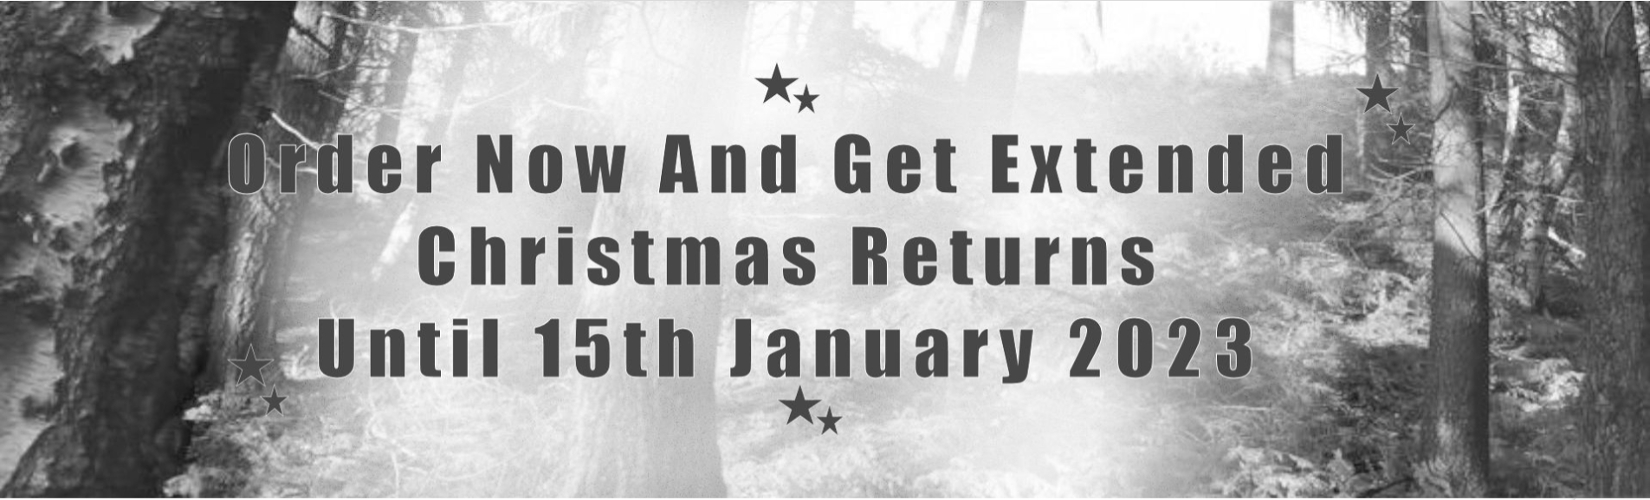 Extended Christmas Returns Period Now Active - Orders Bought As Gifts May Be Returned For Size Swap Or Refund Up To 15/01/2024.